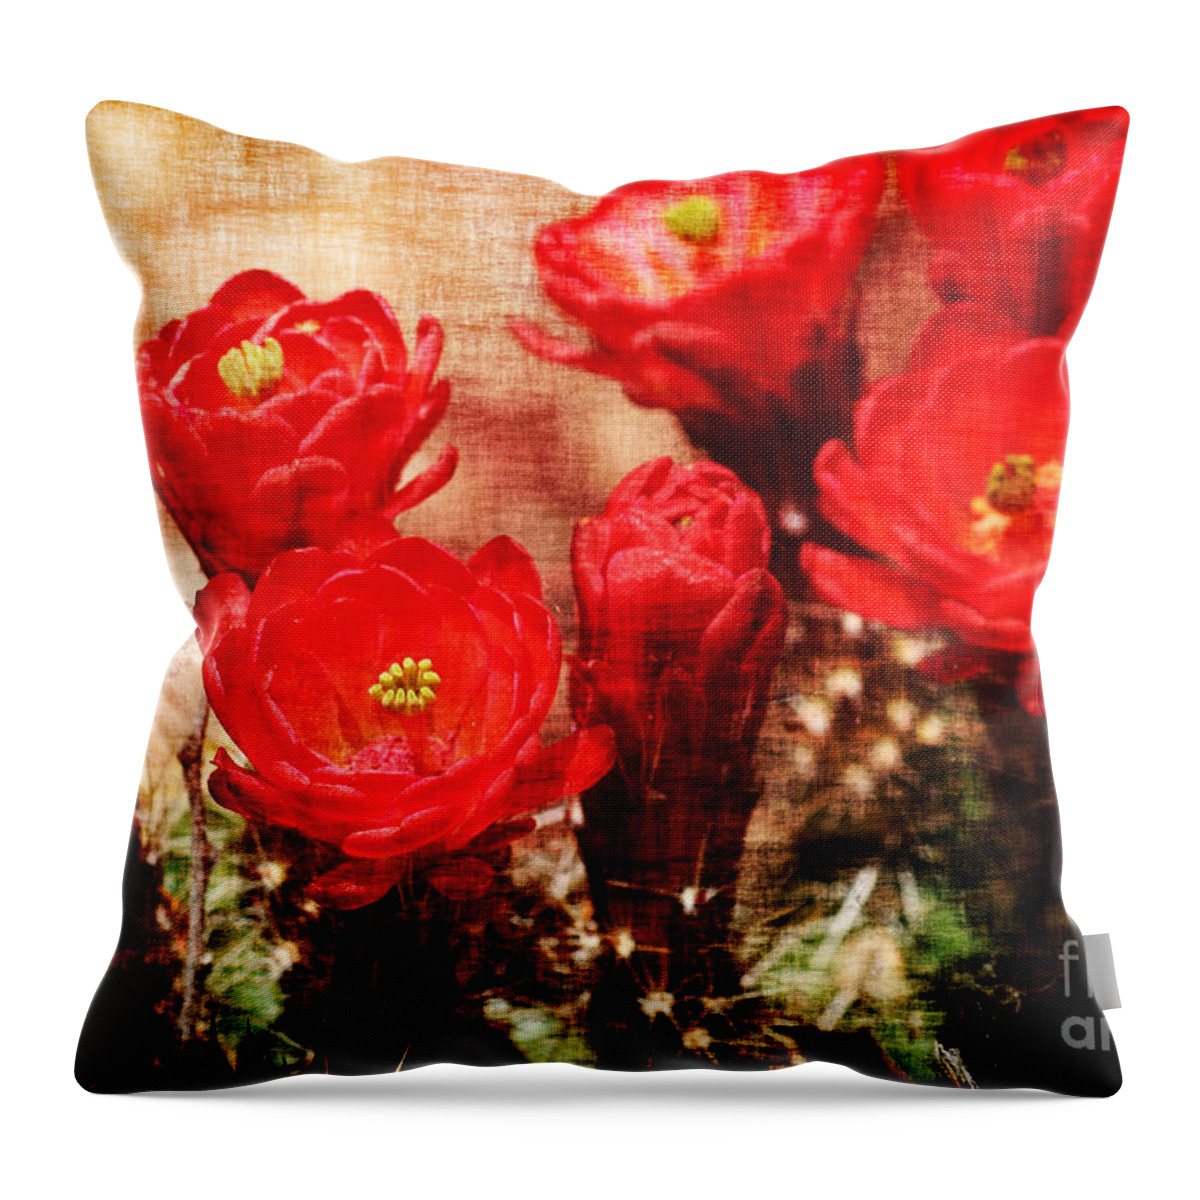 Cactus Throw Pillow featuring the photograph Cactus Flowers by Julie Lueders 